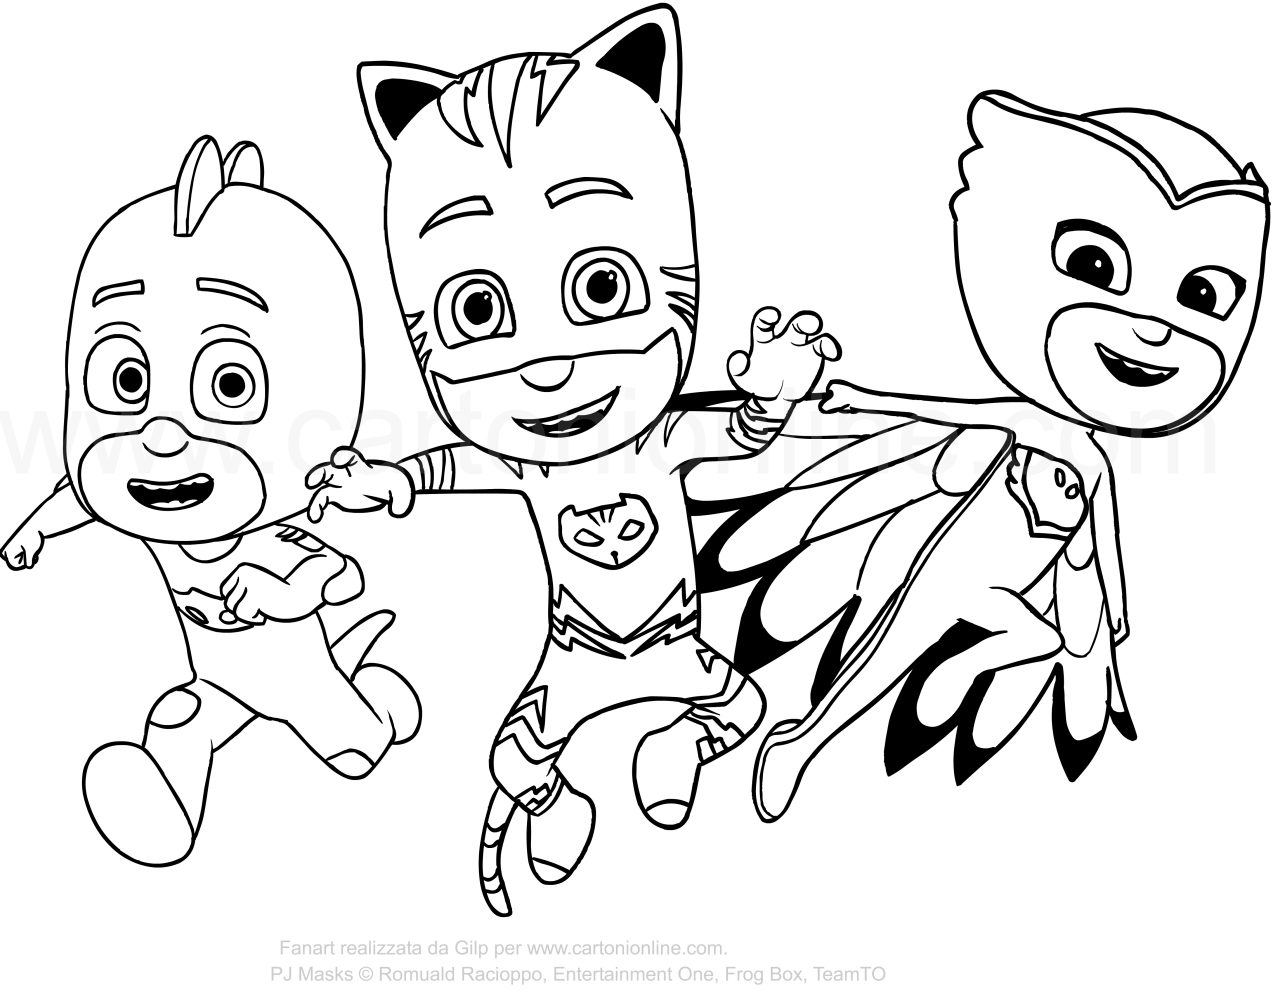 Pj Masks Free Coloring Pages at GetColorings.com | Free ...